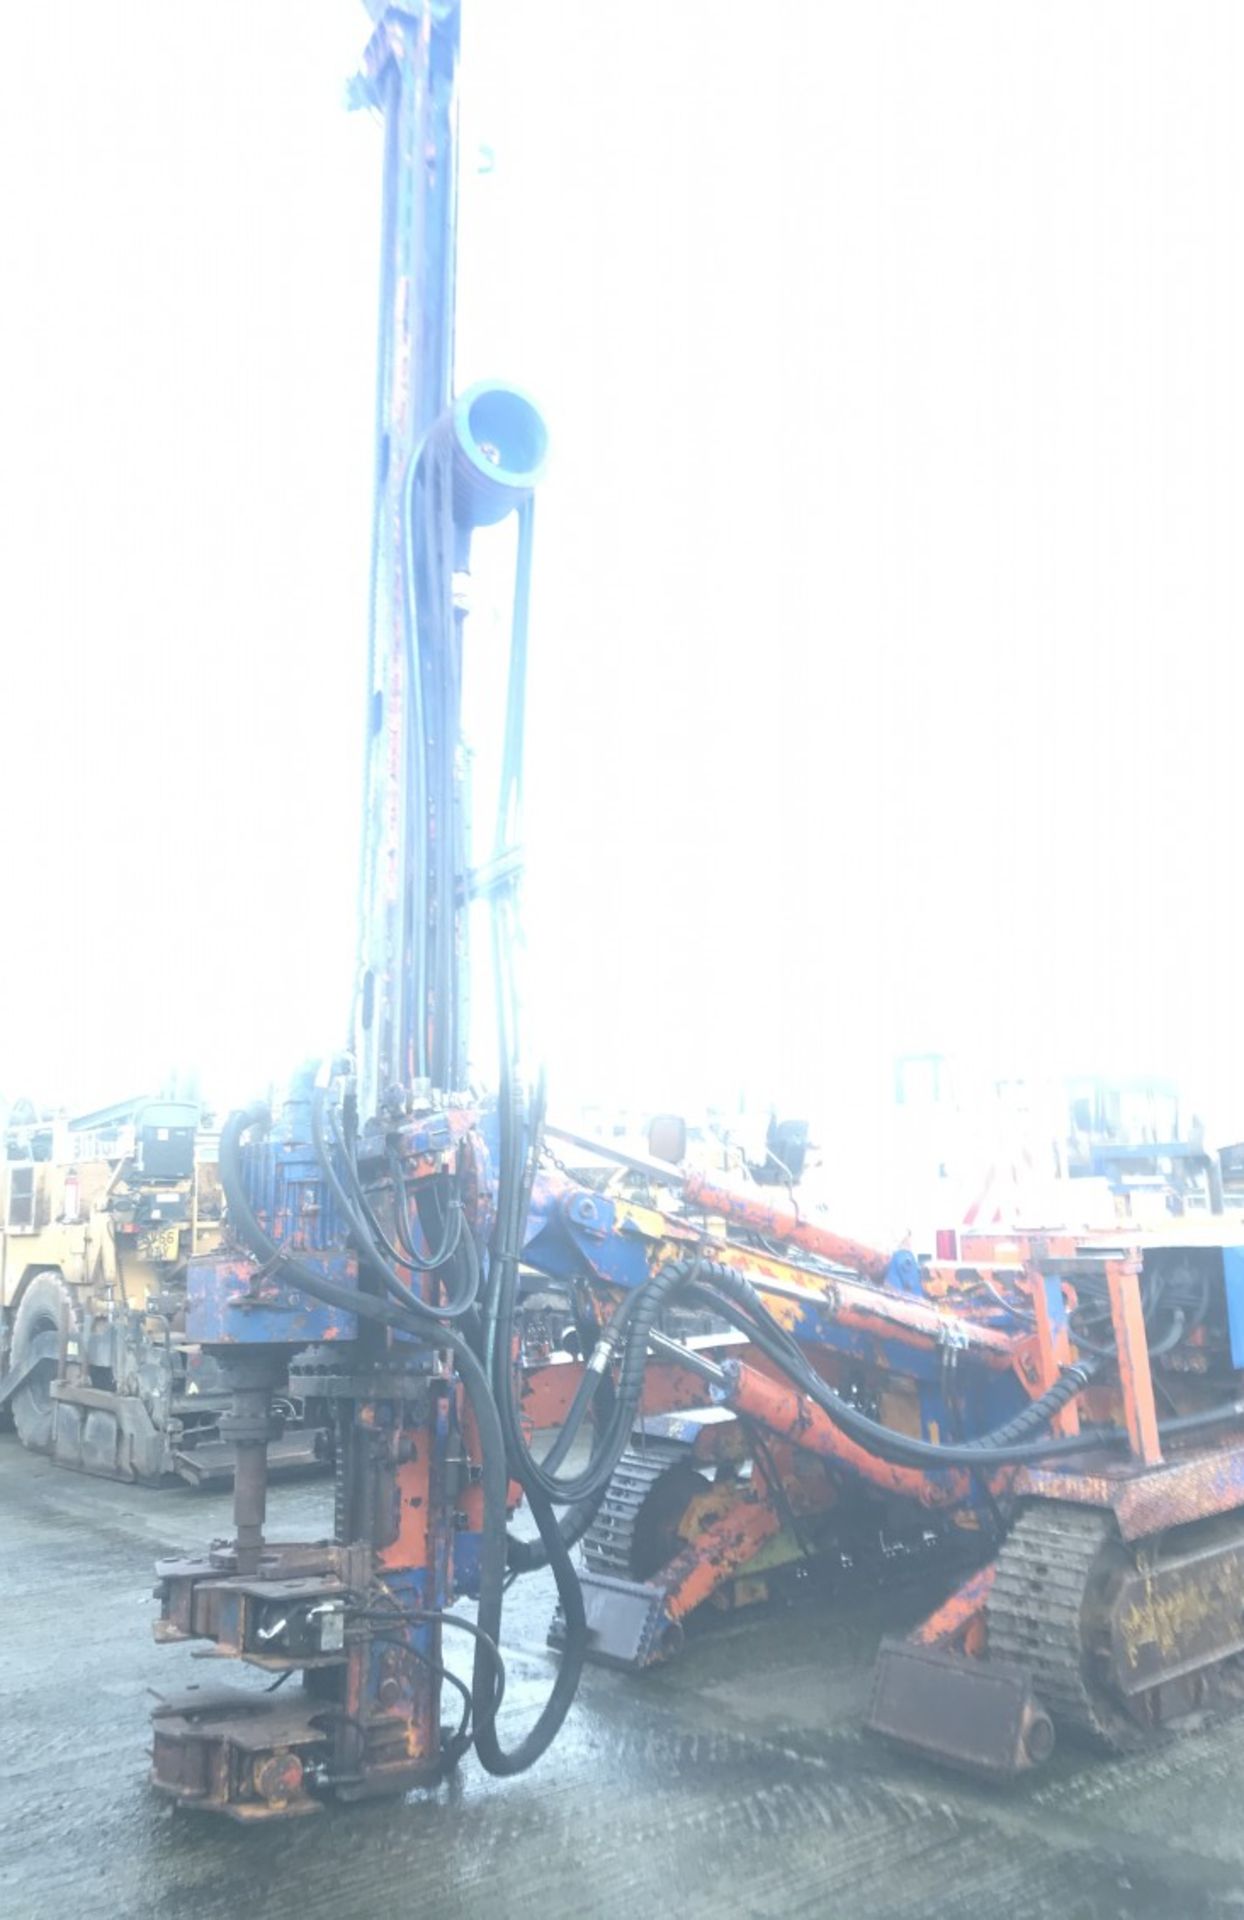 CASAGRANDE C6 TRACKED DRILLING RIG - Image 10 of 13